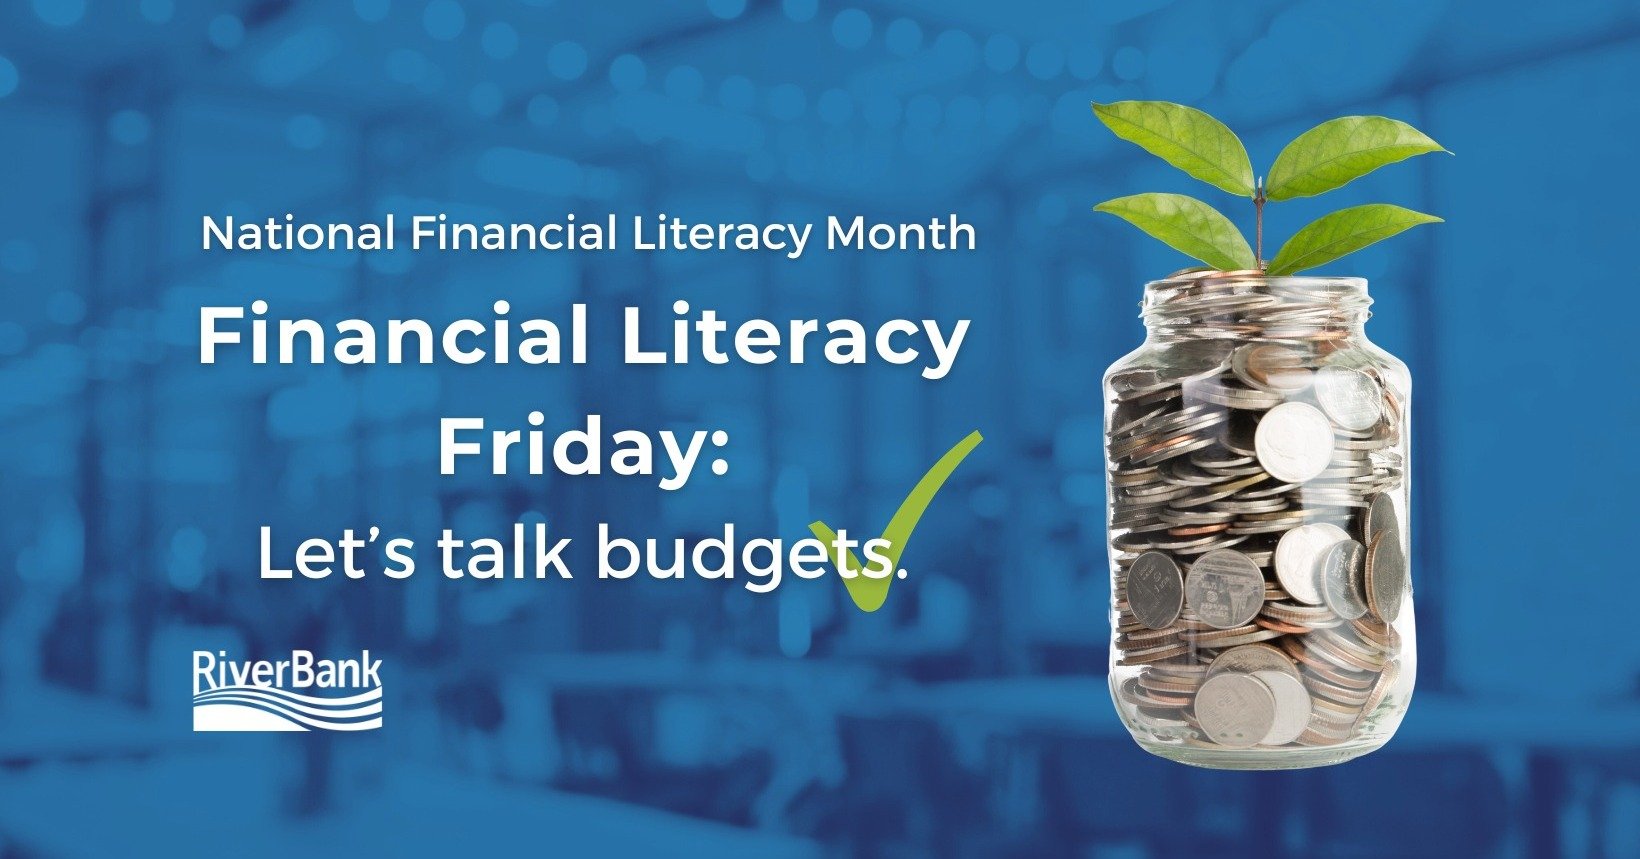 April is National Financial Literacy Month, and we want to celebrate by giving you some essential tools and tips on important financial topics! Let's talk budgets....do you have one? Do you know how to start one? If not, we are here to help! Click th